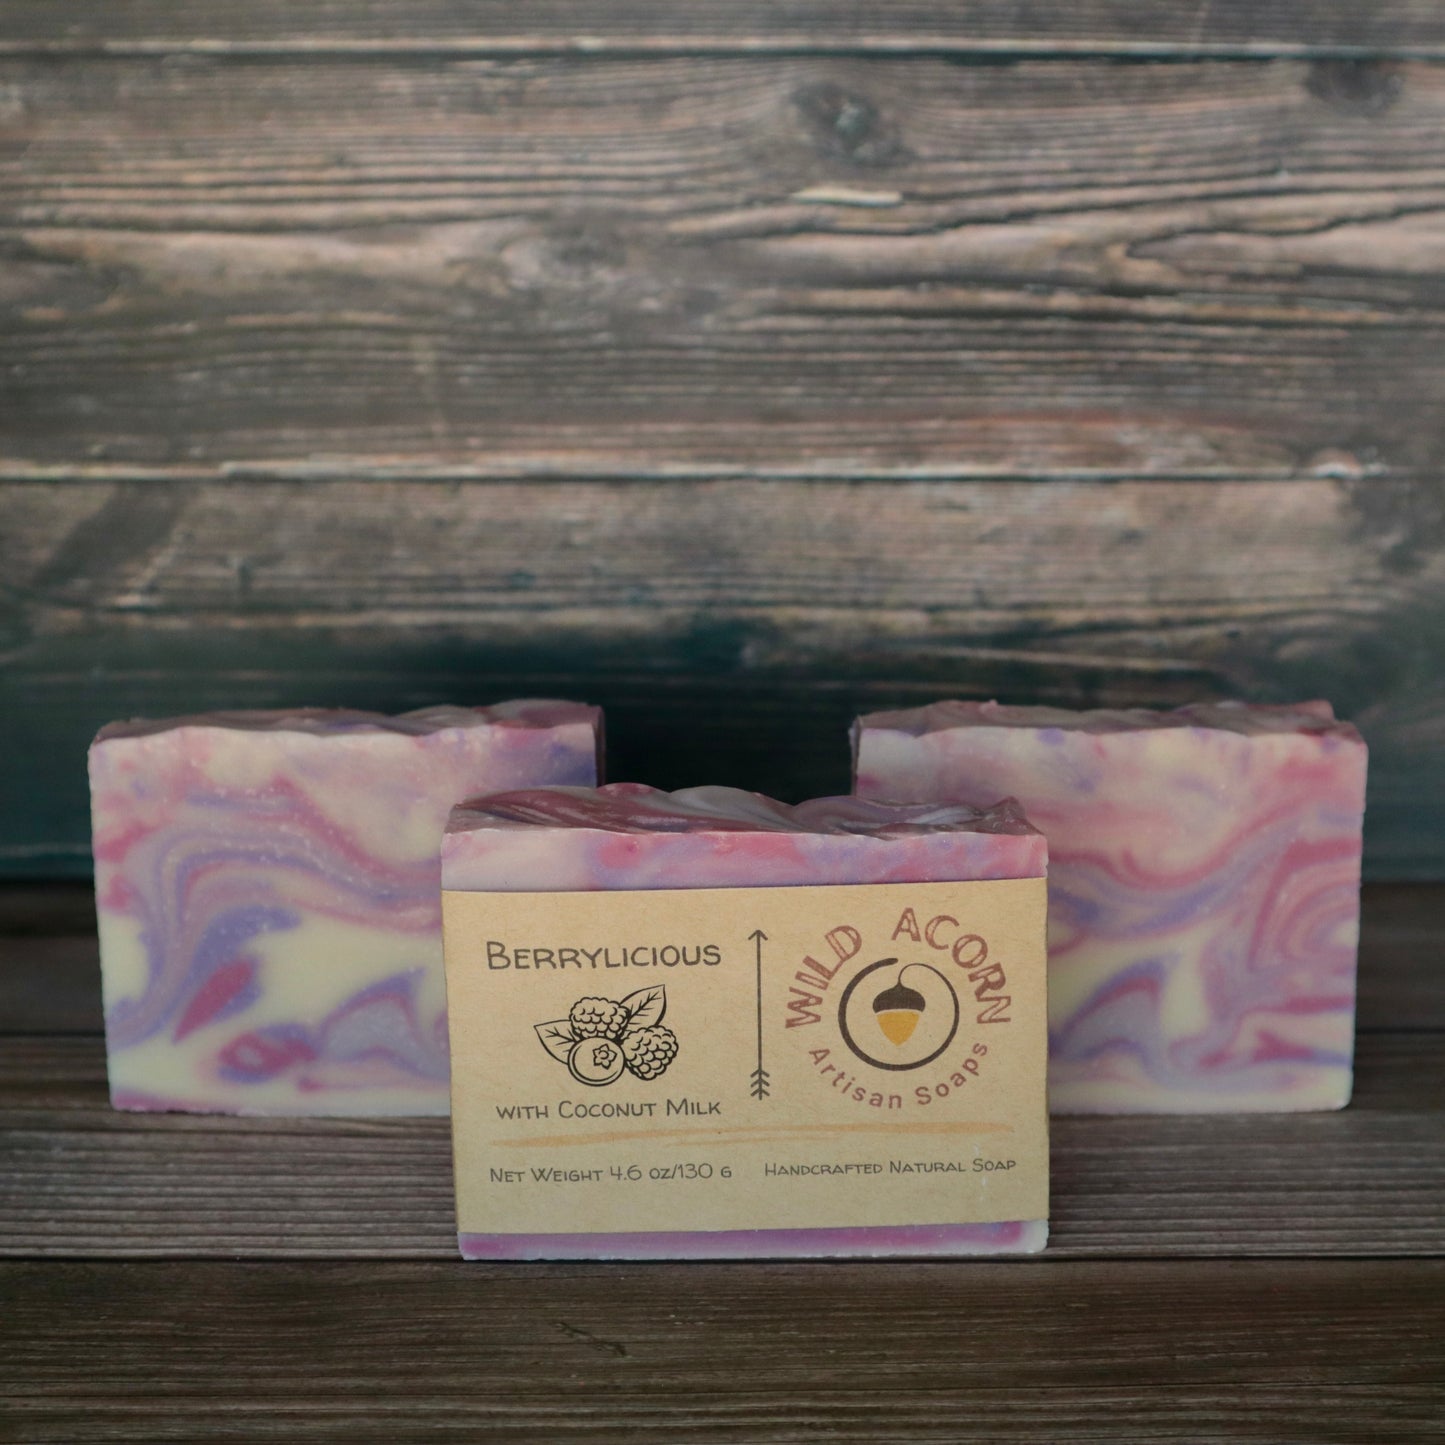 Three bars of soap colored pink, purple and white swirled together to represent berry colors. One bar has a label on it with a picture of two raspberries and a blueberry and two leaves.